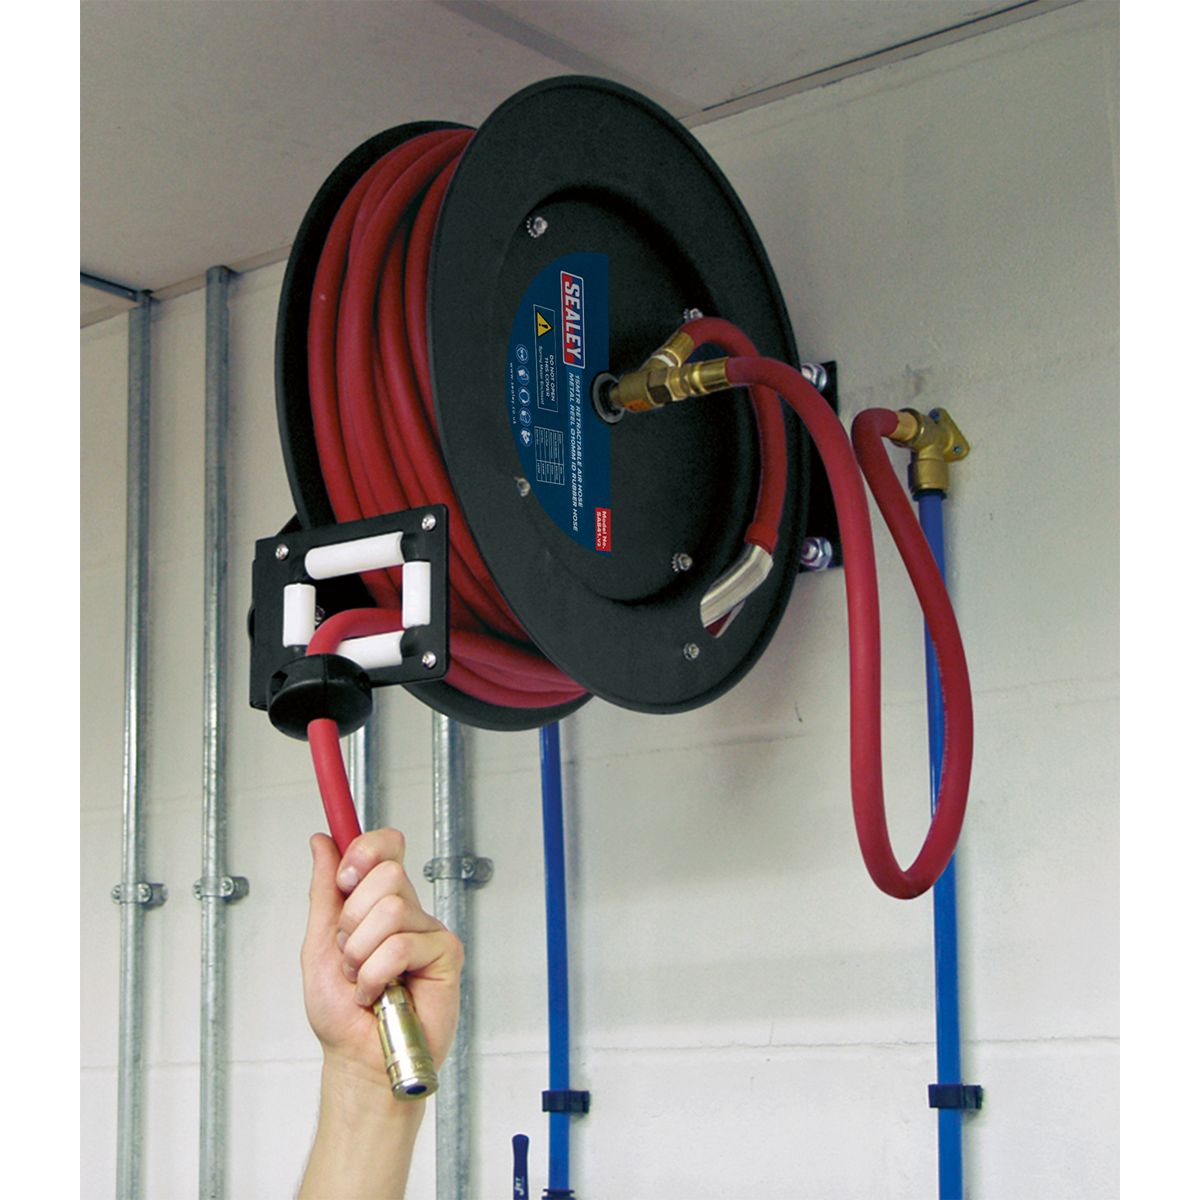 Retractable Air or Water Hose Reel | Blue Case | Macnaught USA